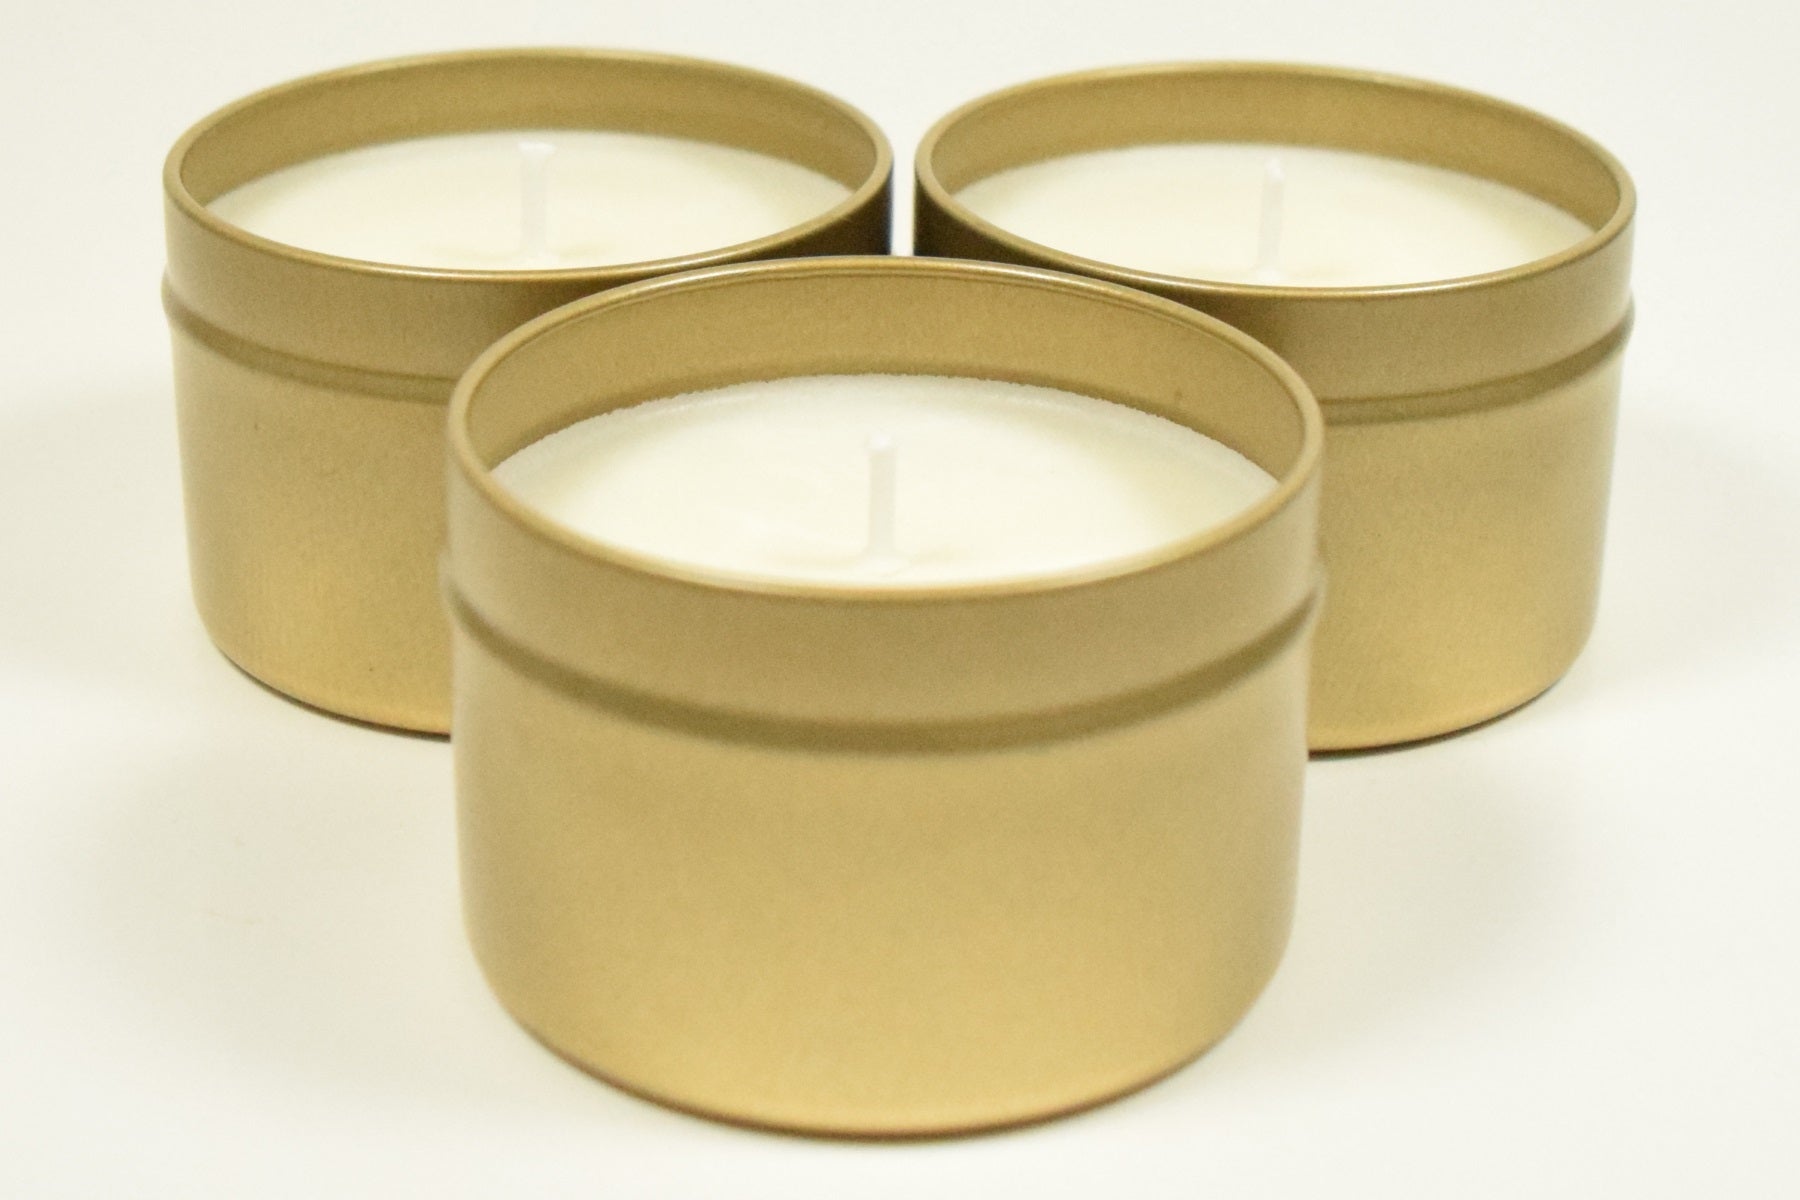 Sea Salted Lime Scented Soy Wax Candle - ScentSimple Candle Co.